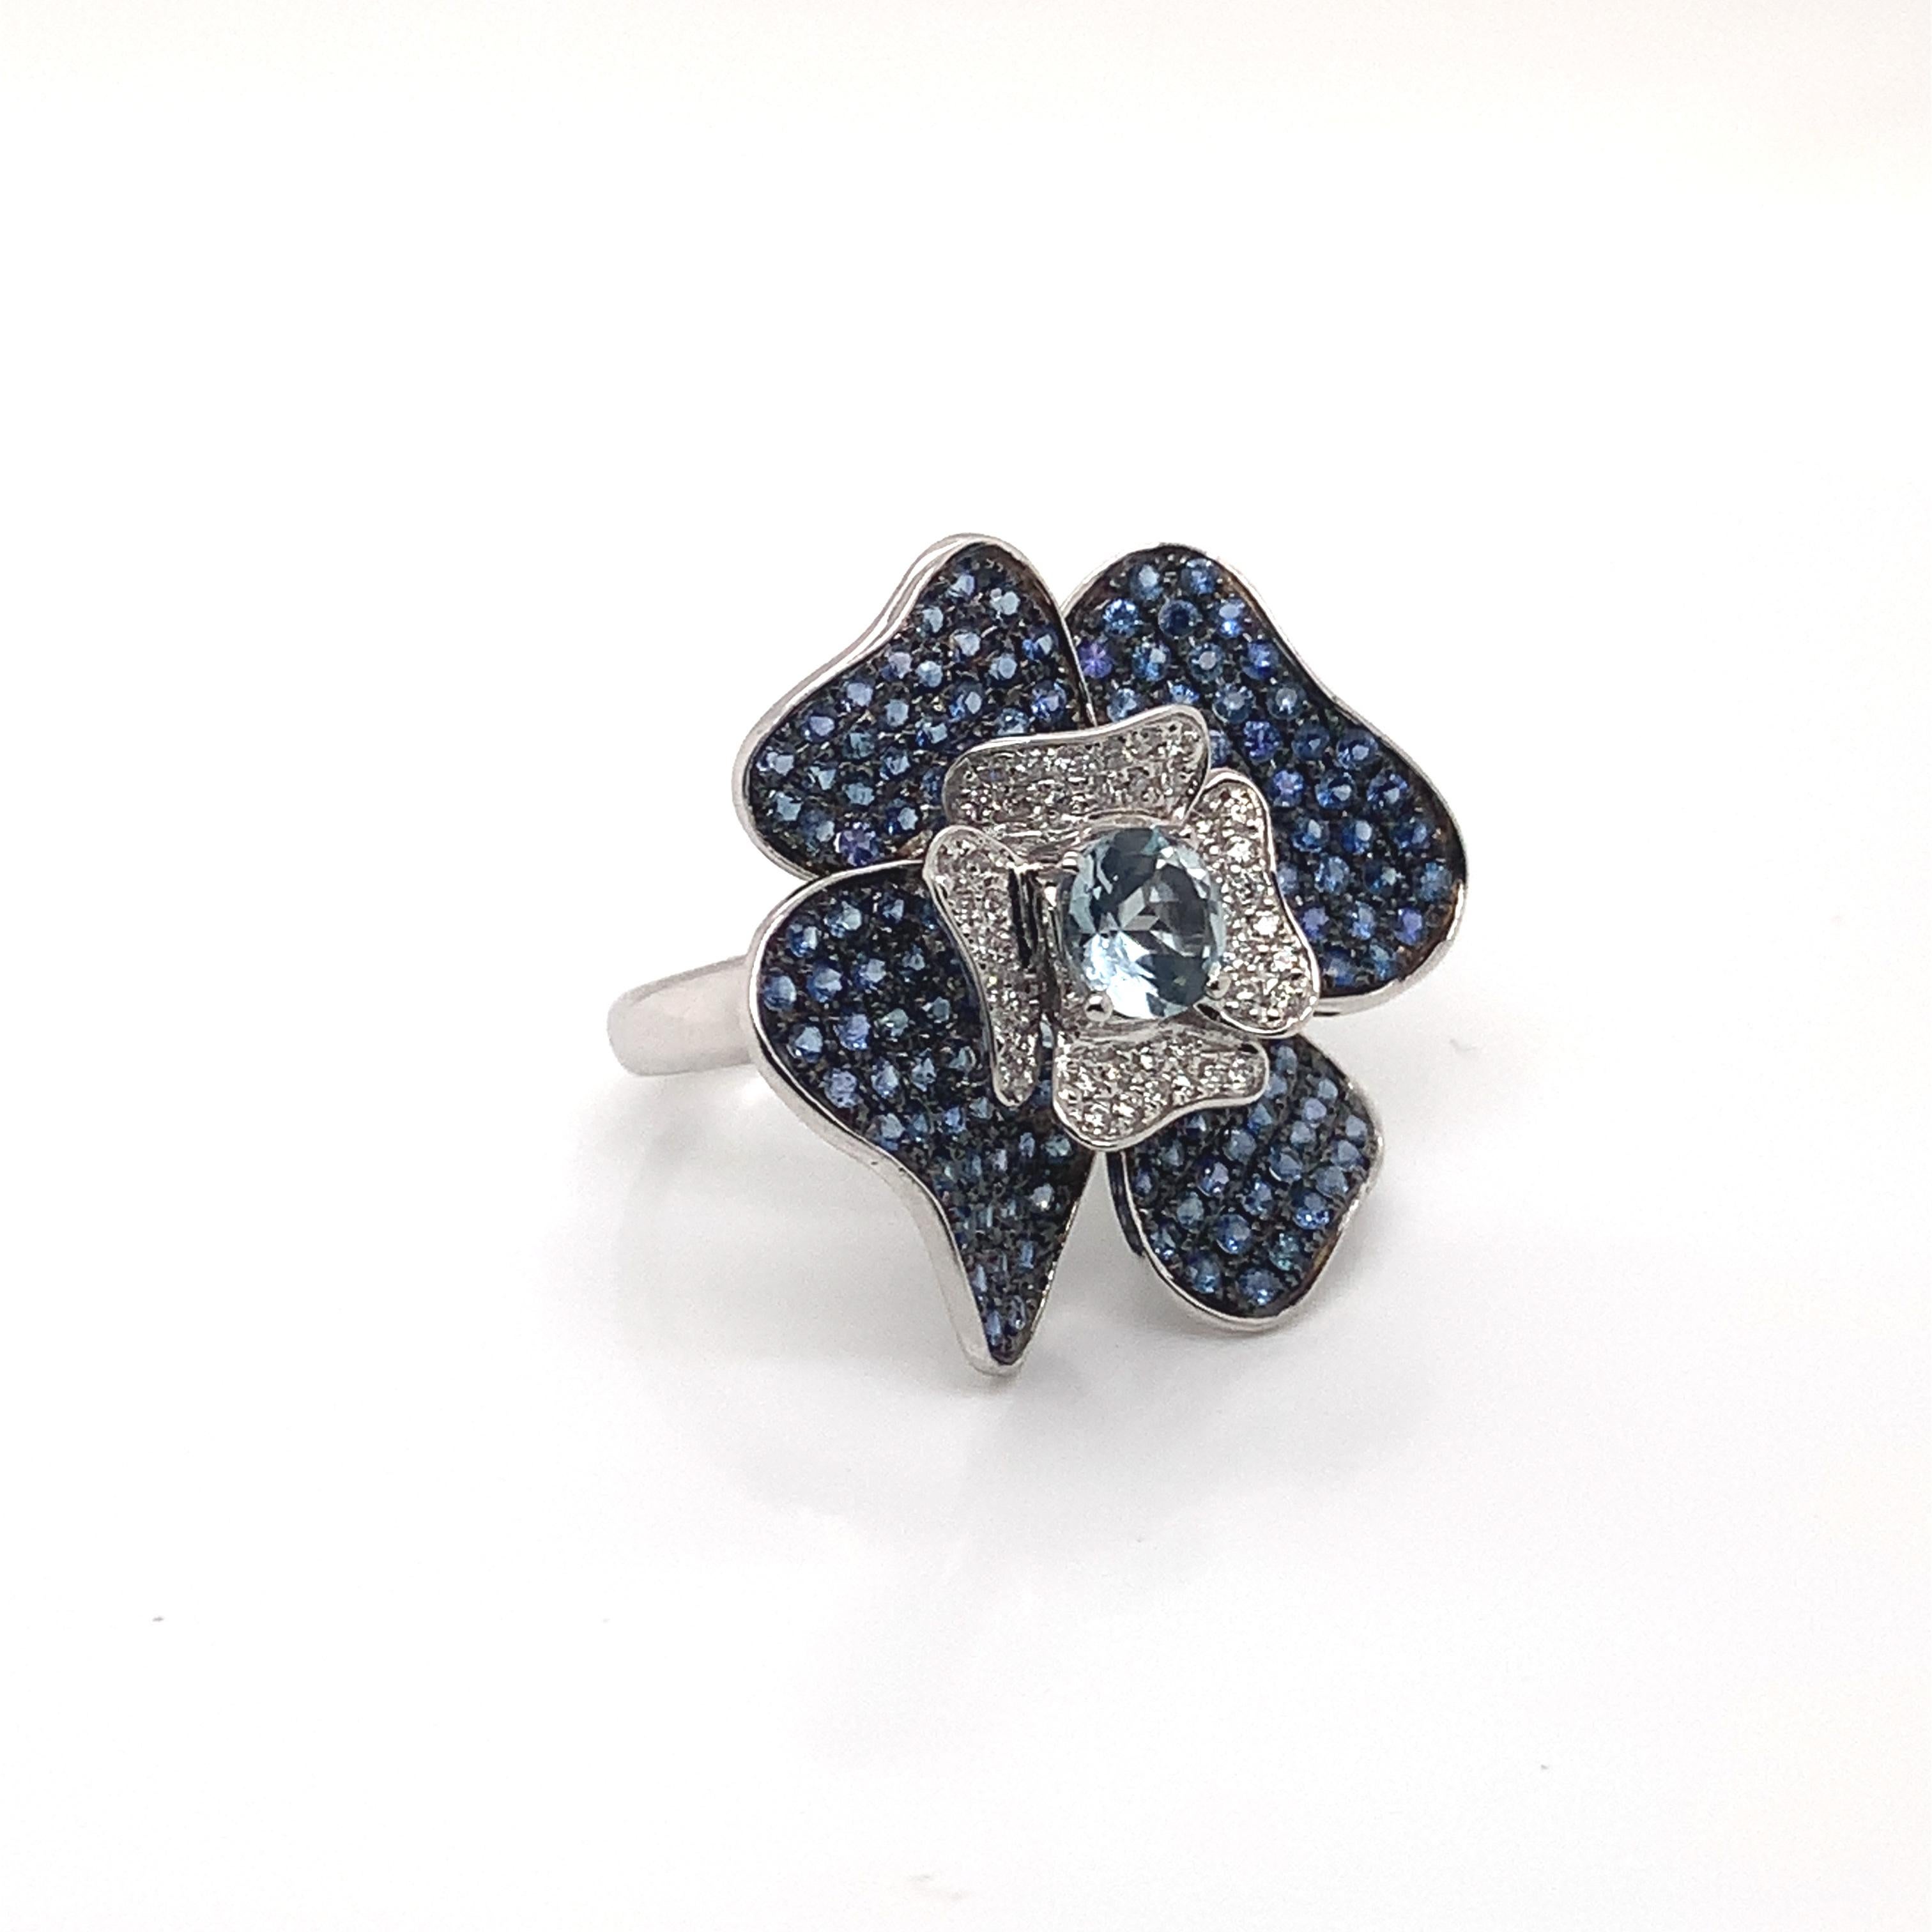 Contemporary Floral 0.72 Carat Aquamarine and Blue Sapphire Ring in 14 Karat White Gold